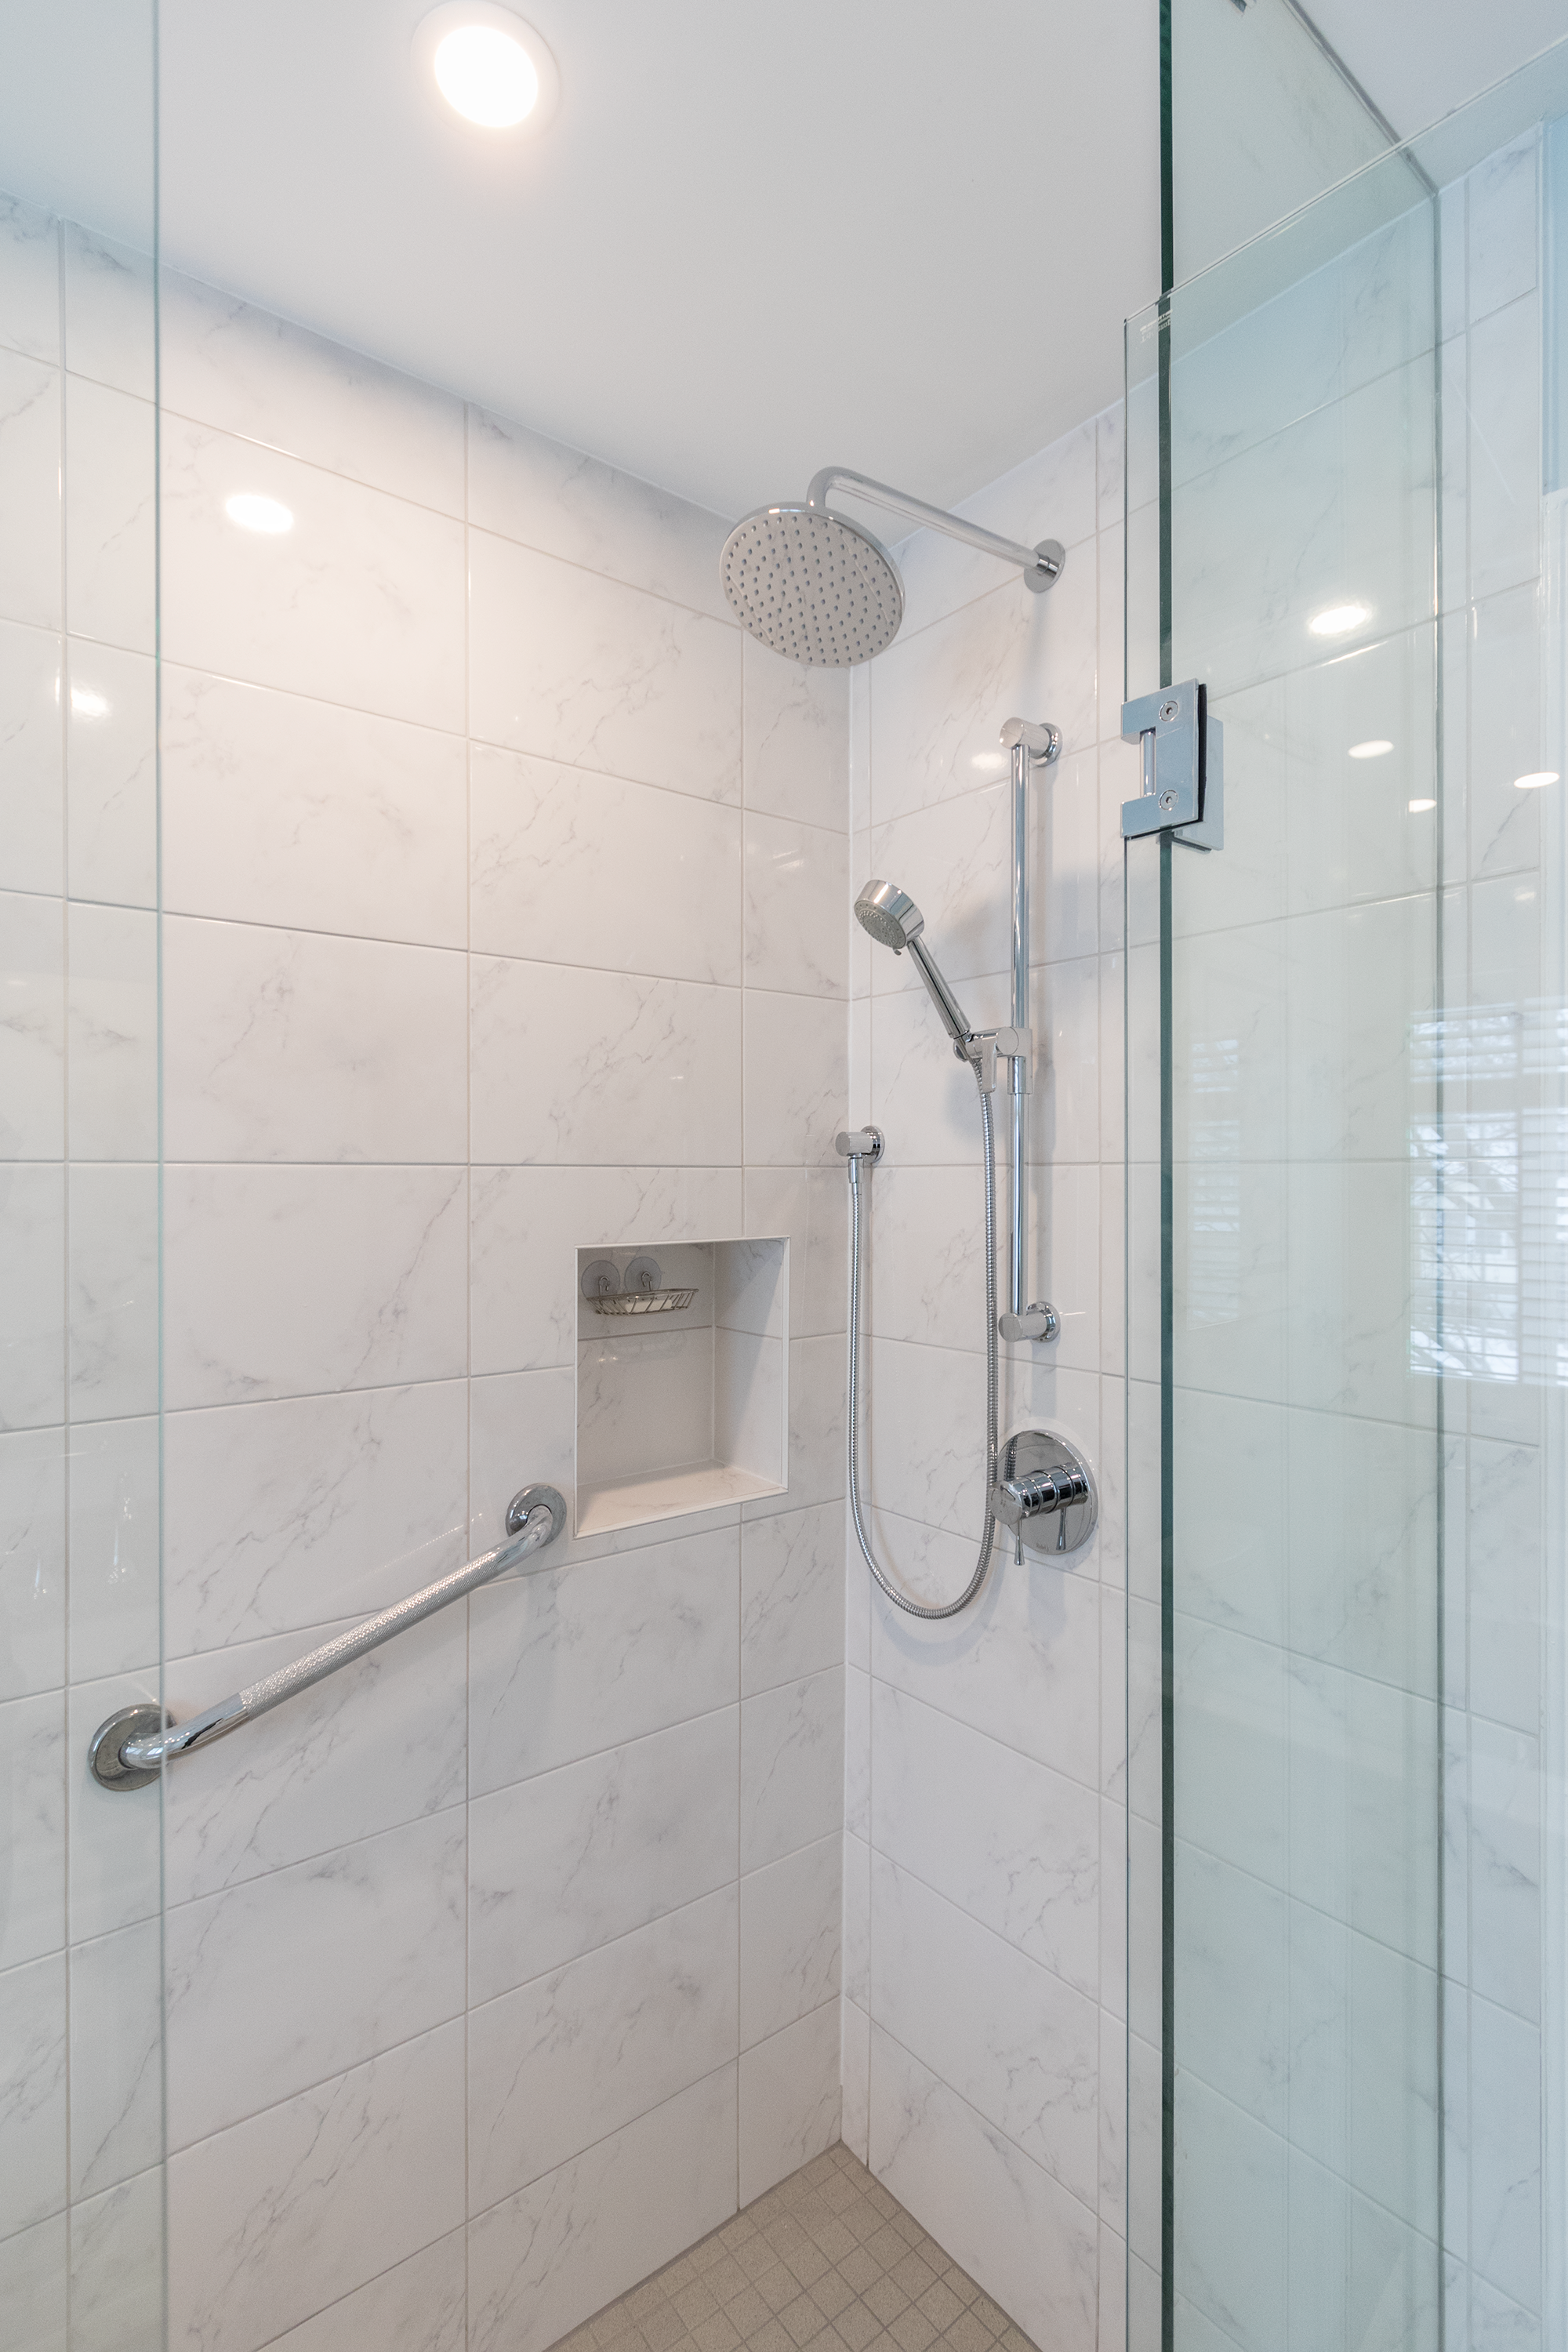 Converting Your Tub To A Walk In Shower, How To Change A Bathtub Shower Head